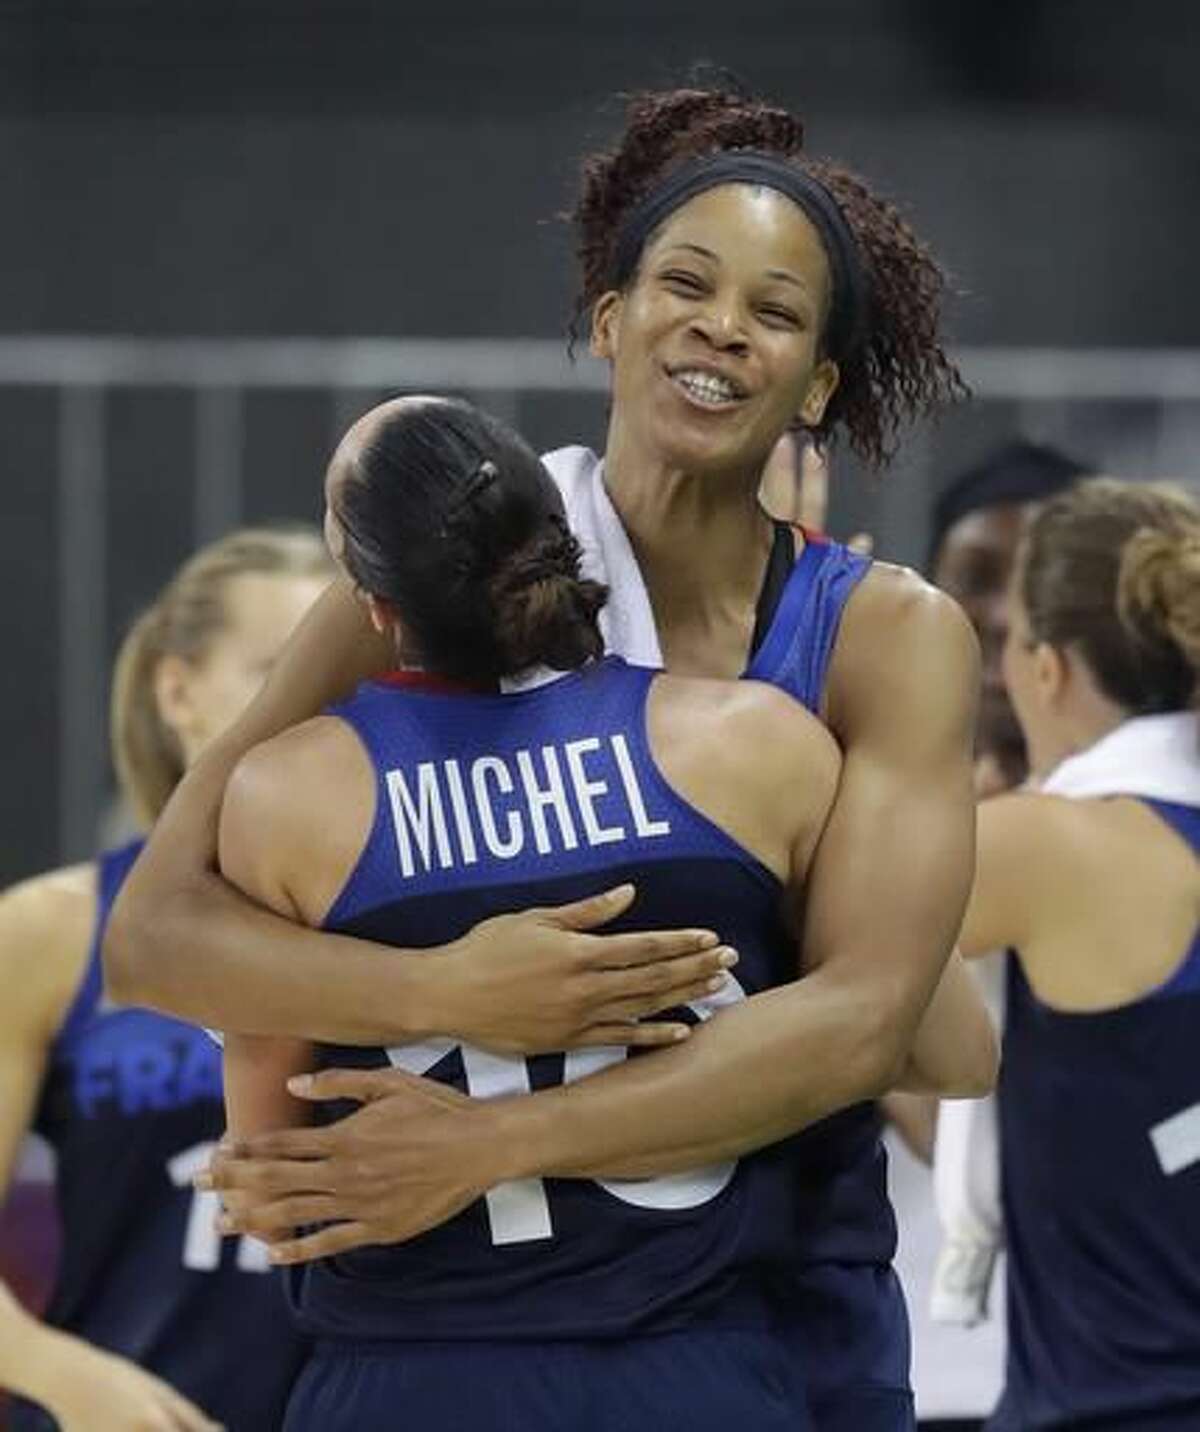 FranceFrance guard Sarah Michel (10) is hugged by teammate Marielle Amant after their women's basketball game against Turkey at the Youth Center at the 2016 Summer Olympics in Rio de Janeiro, Brazil, Saturday, Aug. 6, 2016. France defeated Turkey 55-39. (AP Photo/Carlos Osorio)